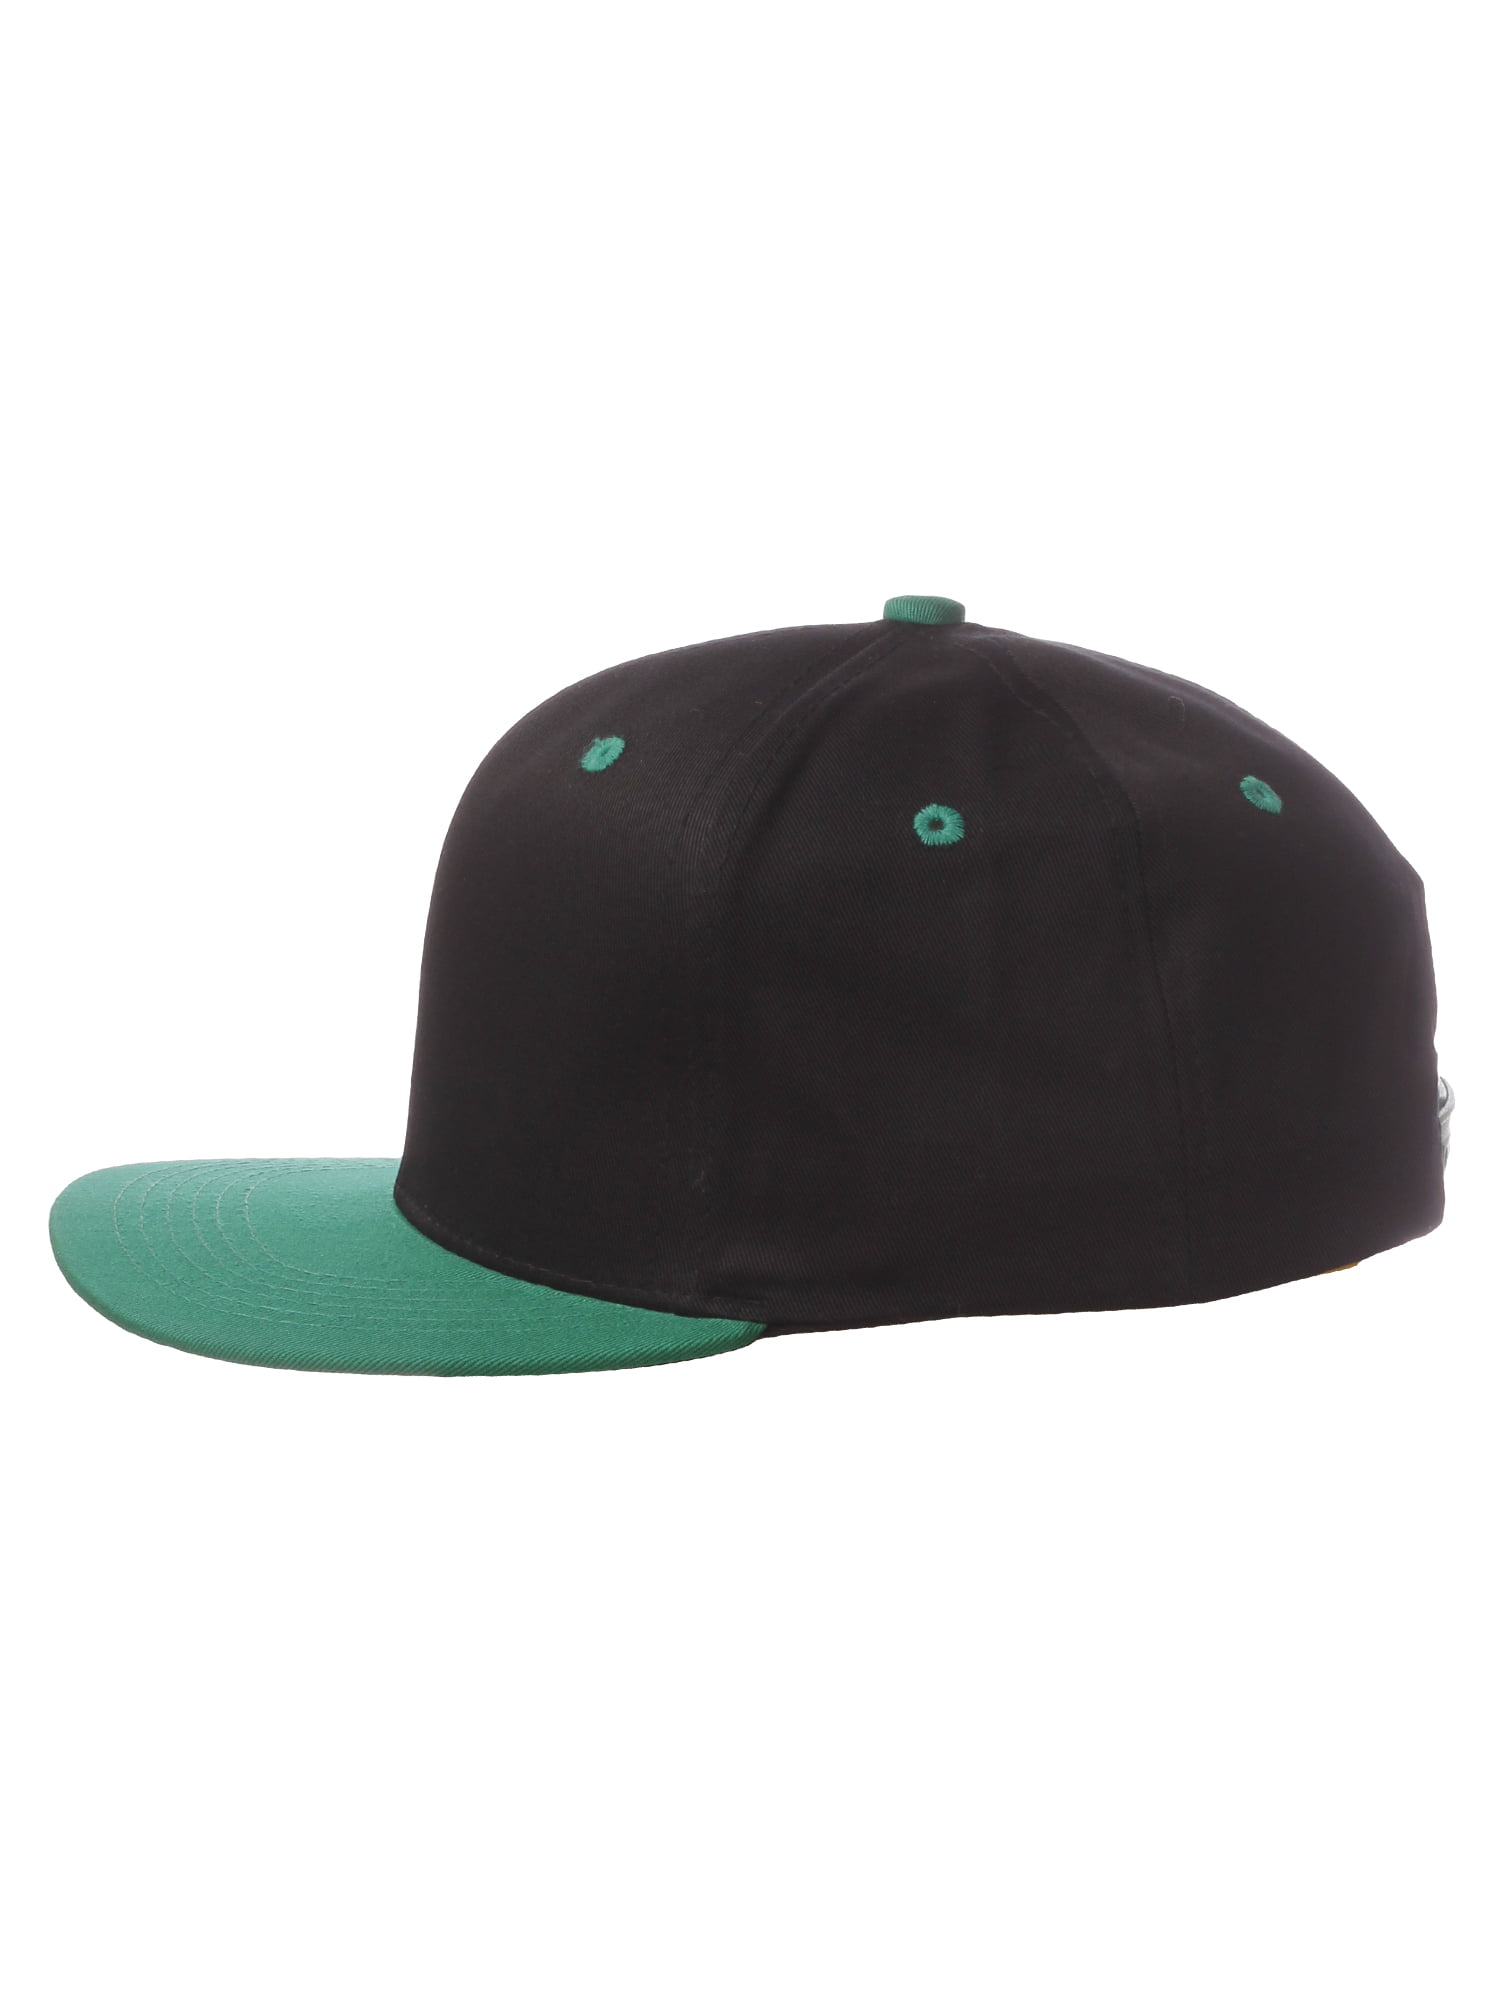 Classic Snapback Hat Custom A to Z Initial Letters, Black Green Cap White  Green Letter Initial T 